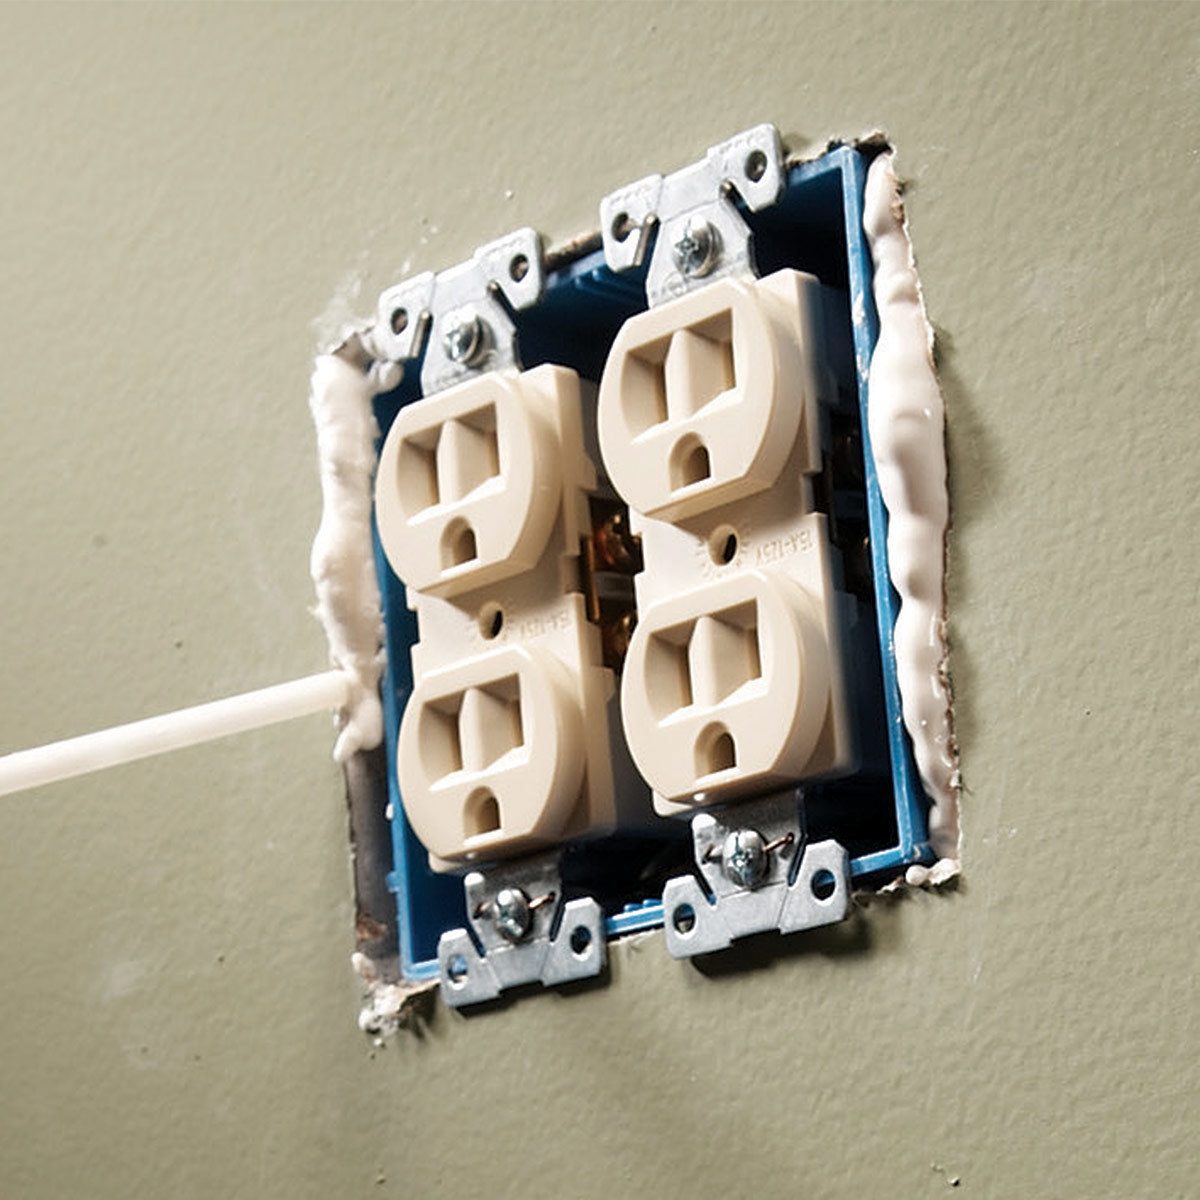 outlet insulation Things homeowners should check in winter